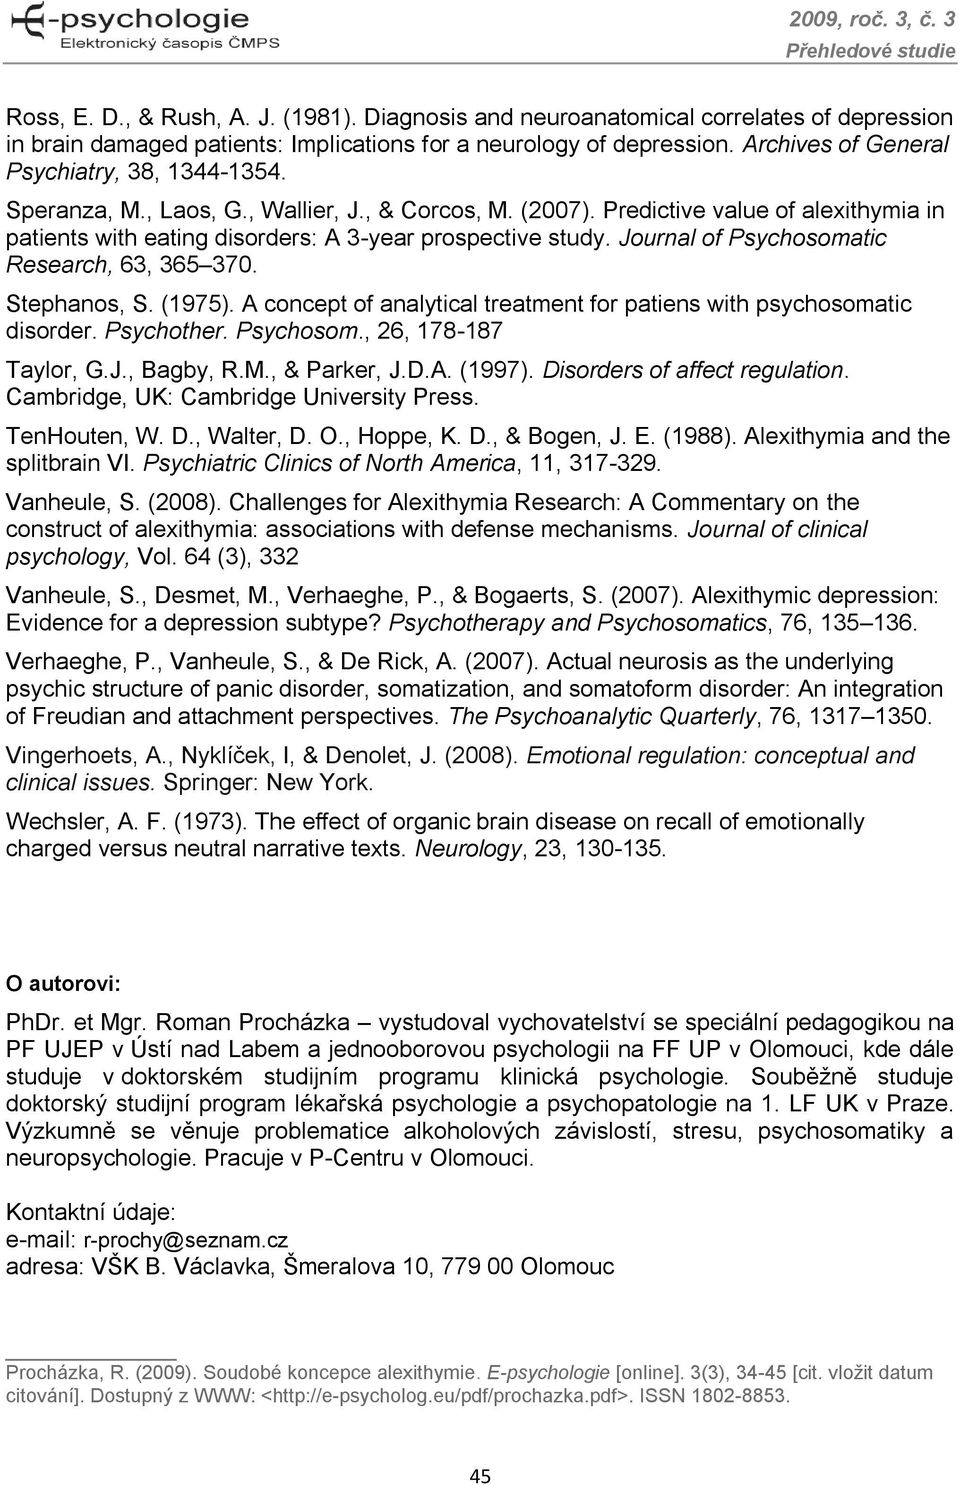 Journal of Psychosomatic Research, 63, 365 370. Stephanos, S. (1975). A concept of analytical treatment for patiens with psychosomatic disorder. Psychother. Psychosom., 26, 178-187 Taylor, G.J., Bagby, R.